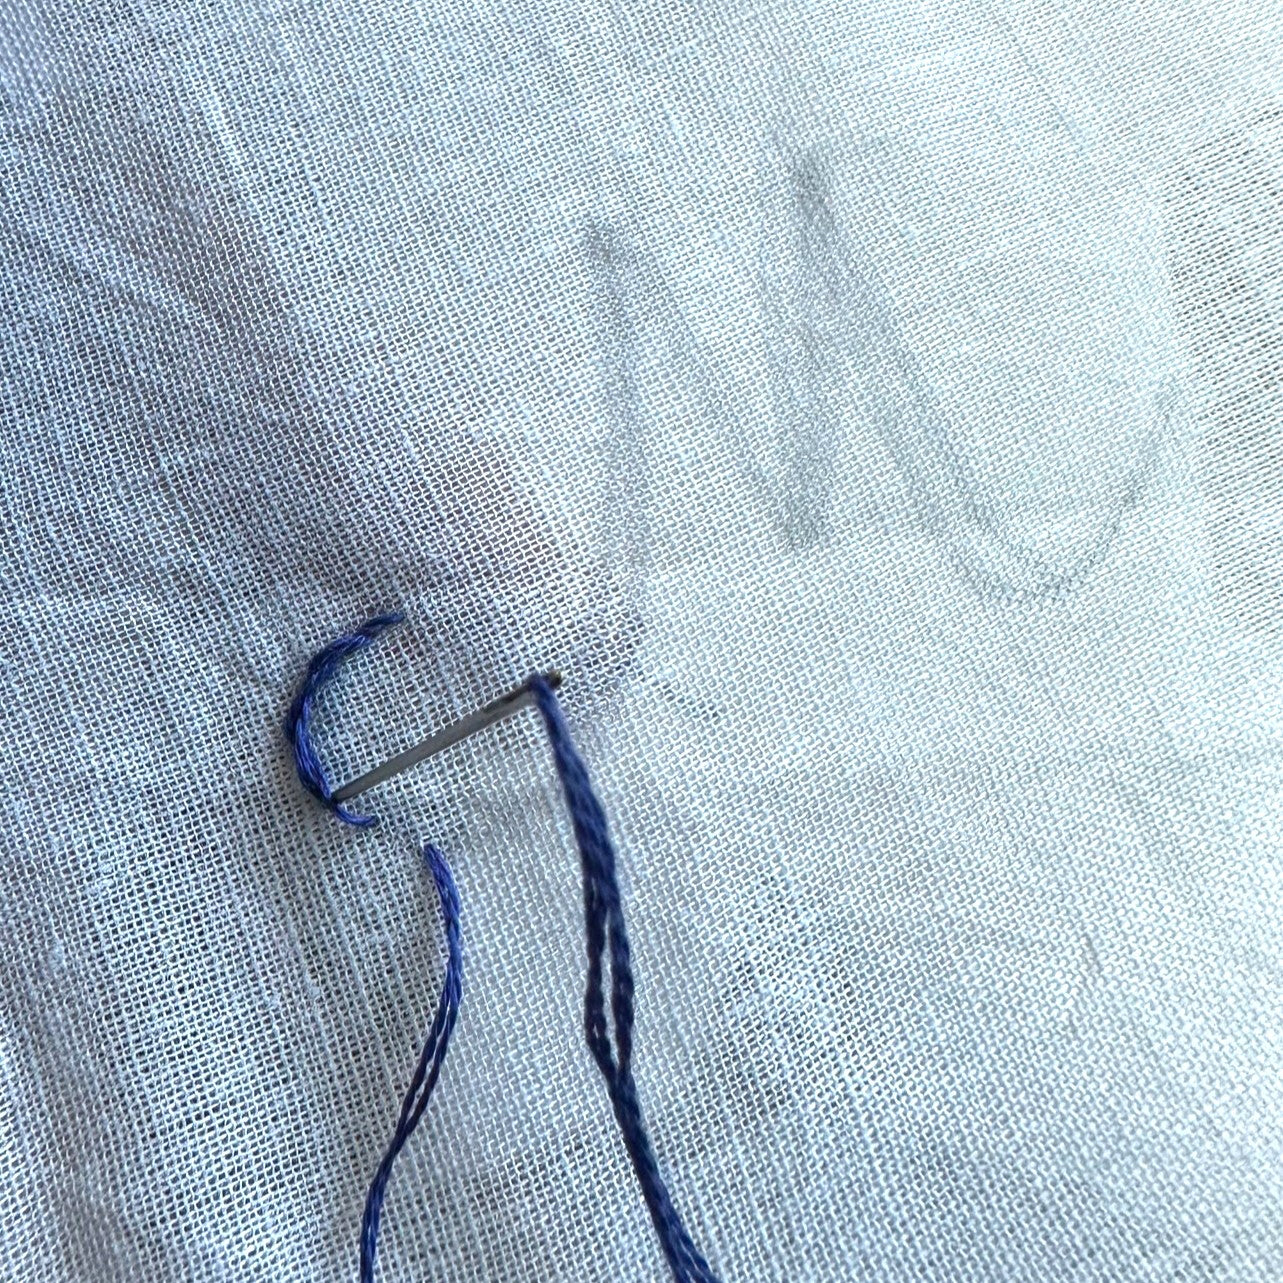 Starting a monogram on white fabric with blue thread.  letter M